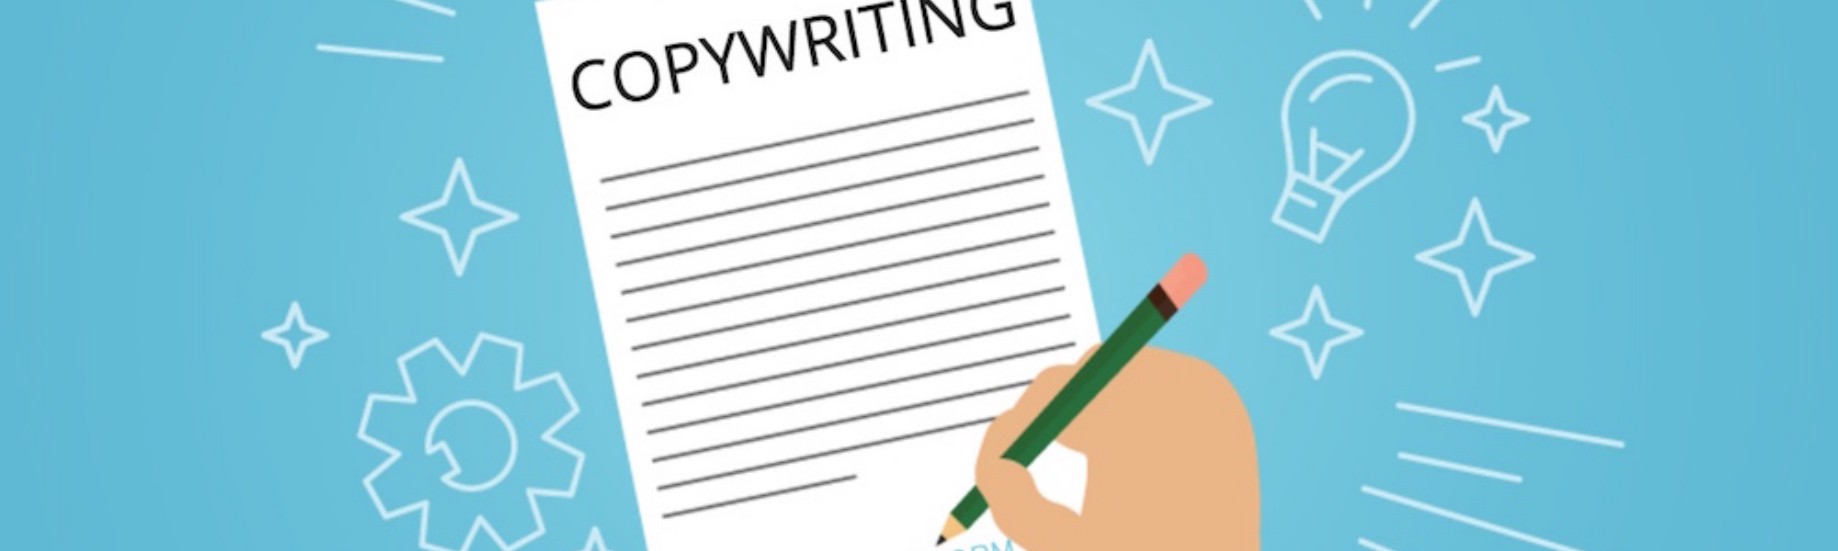 5 Proven Copywriting Tricks That Sell Like Crazy